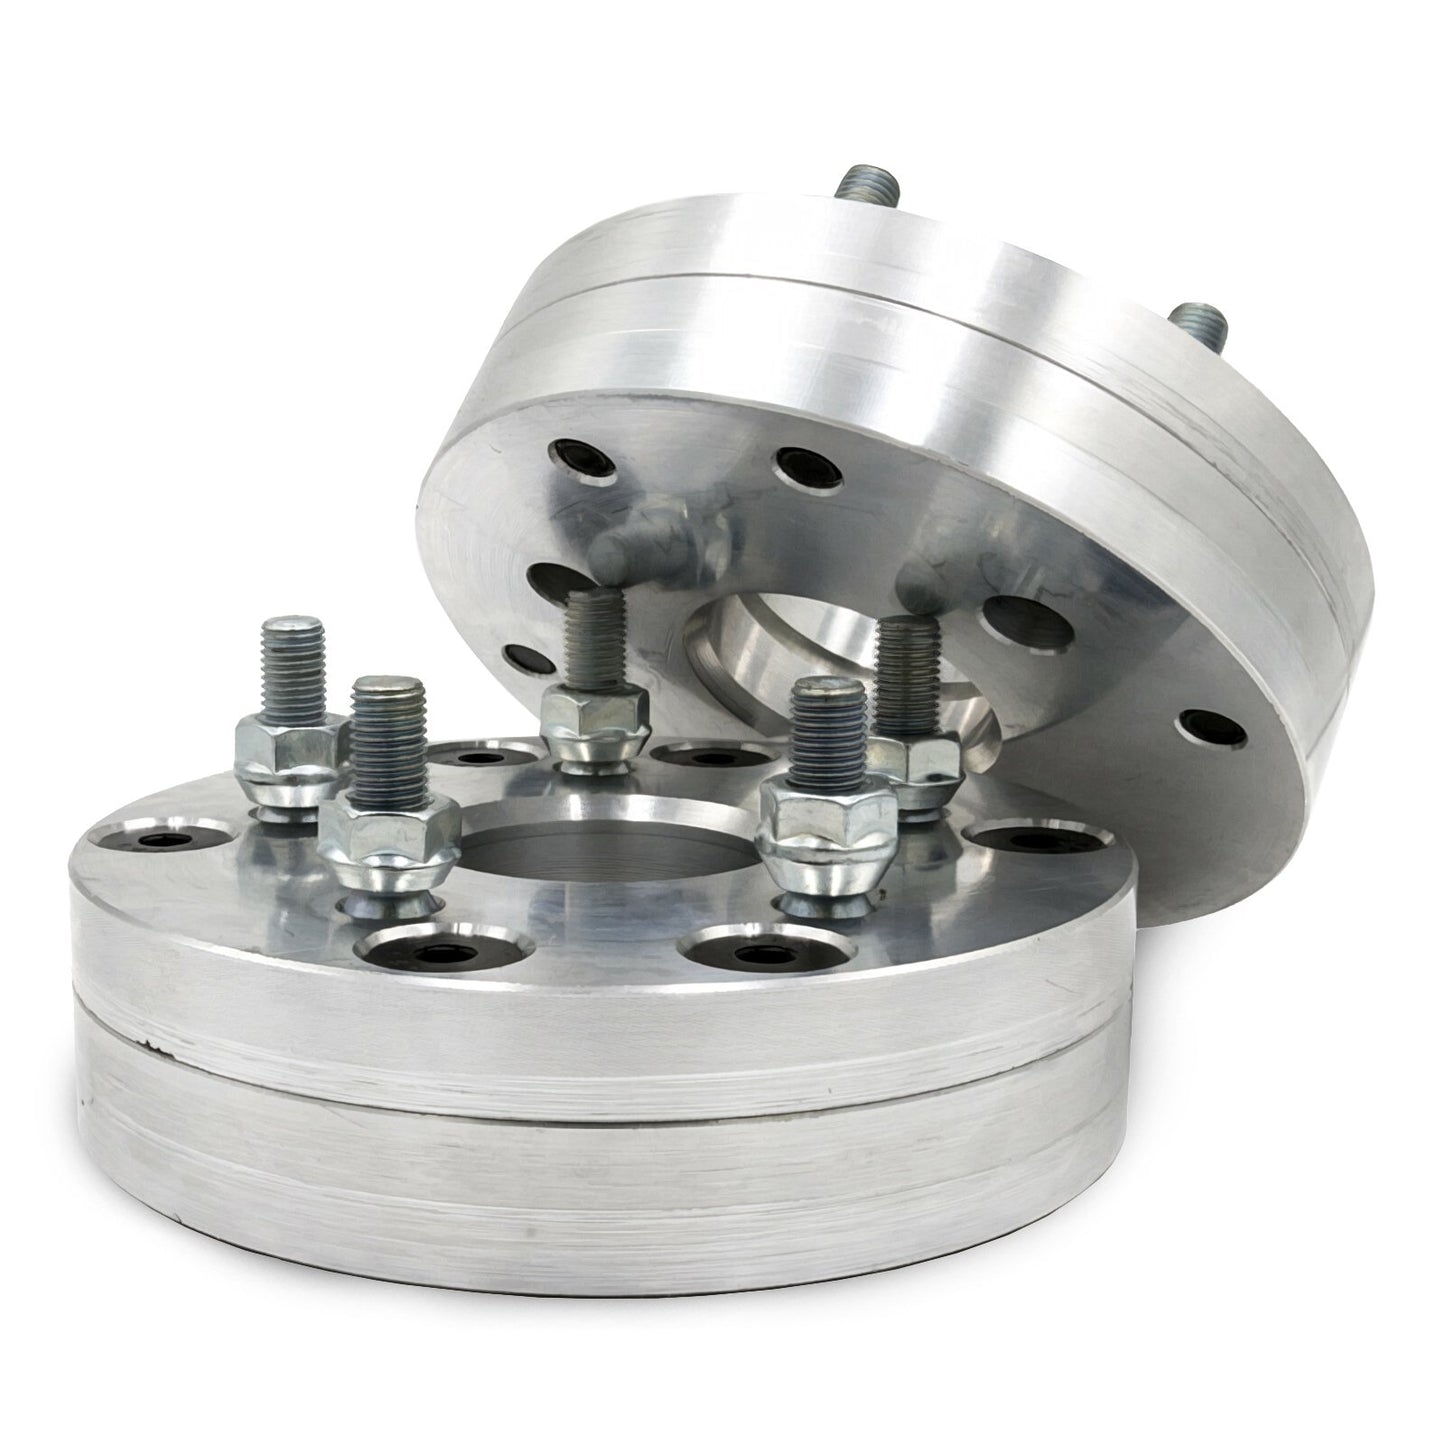 4x144 to 5x120 2 piece Wheel Adapter - Thickness: 1.5" - 3"